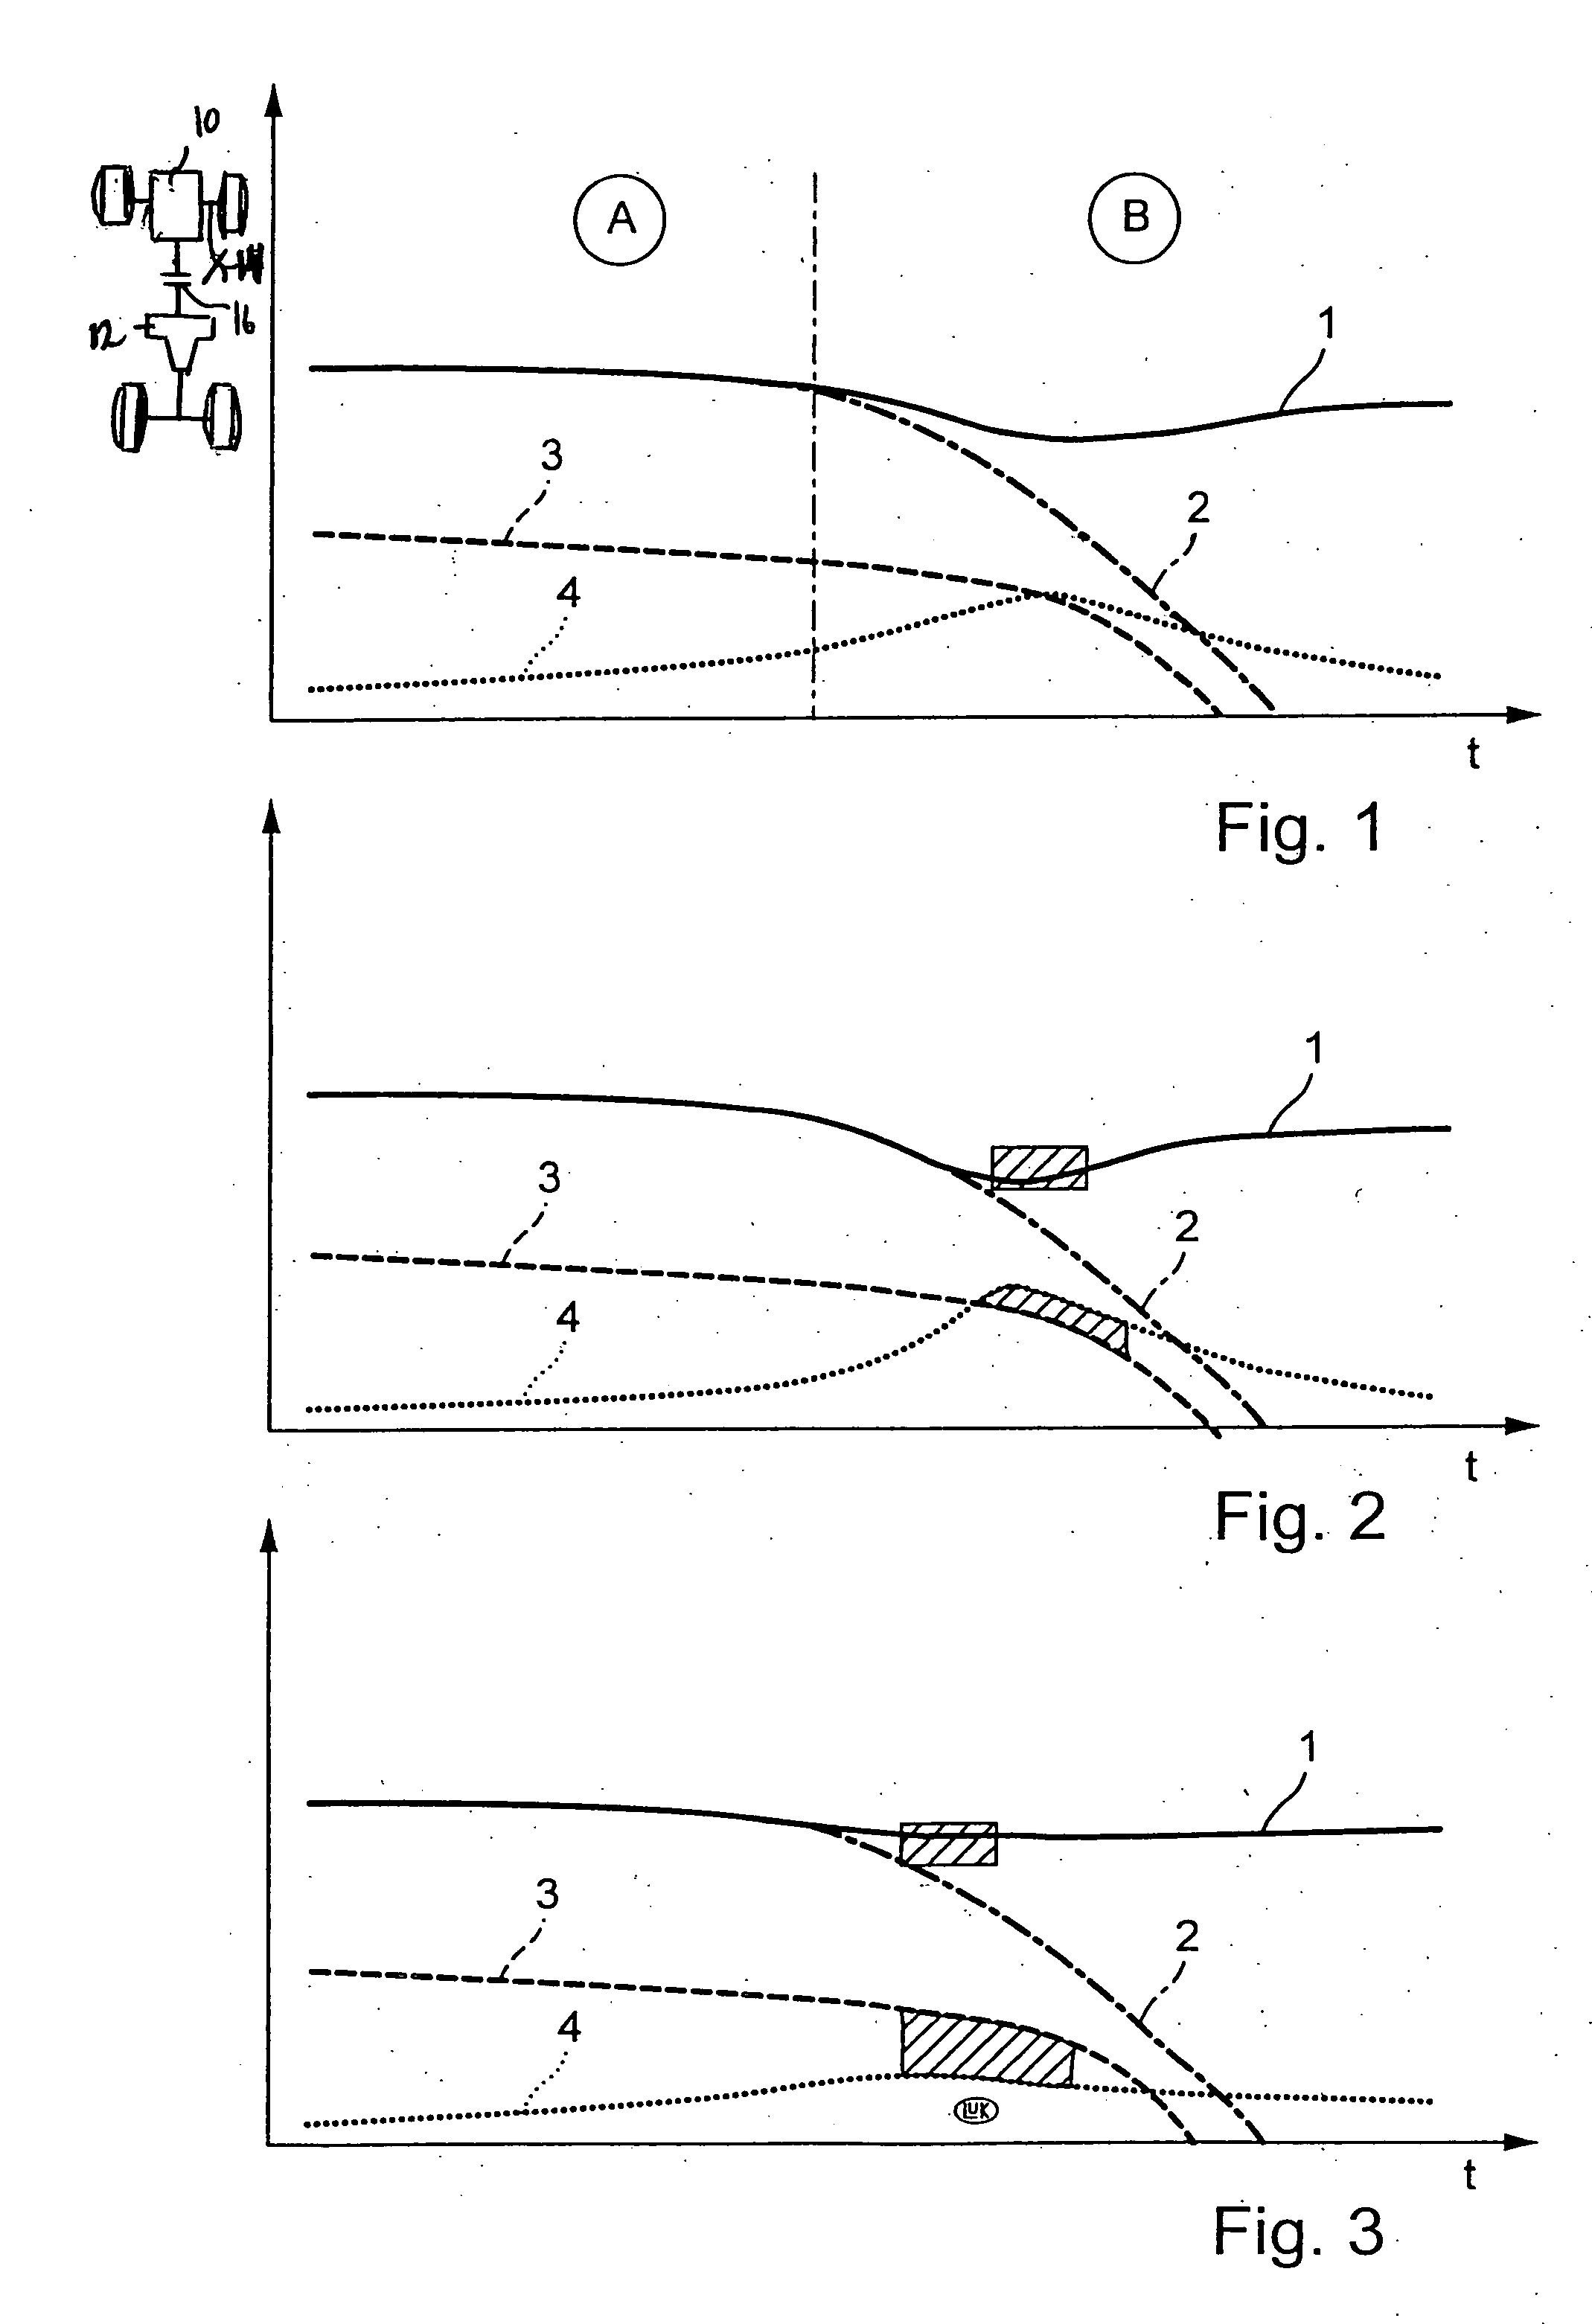 Method for changing the clutch torque in a clutch in the power train of a vehicle having an automated manual shift transmission